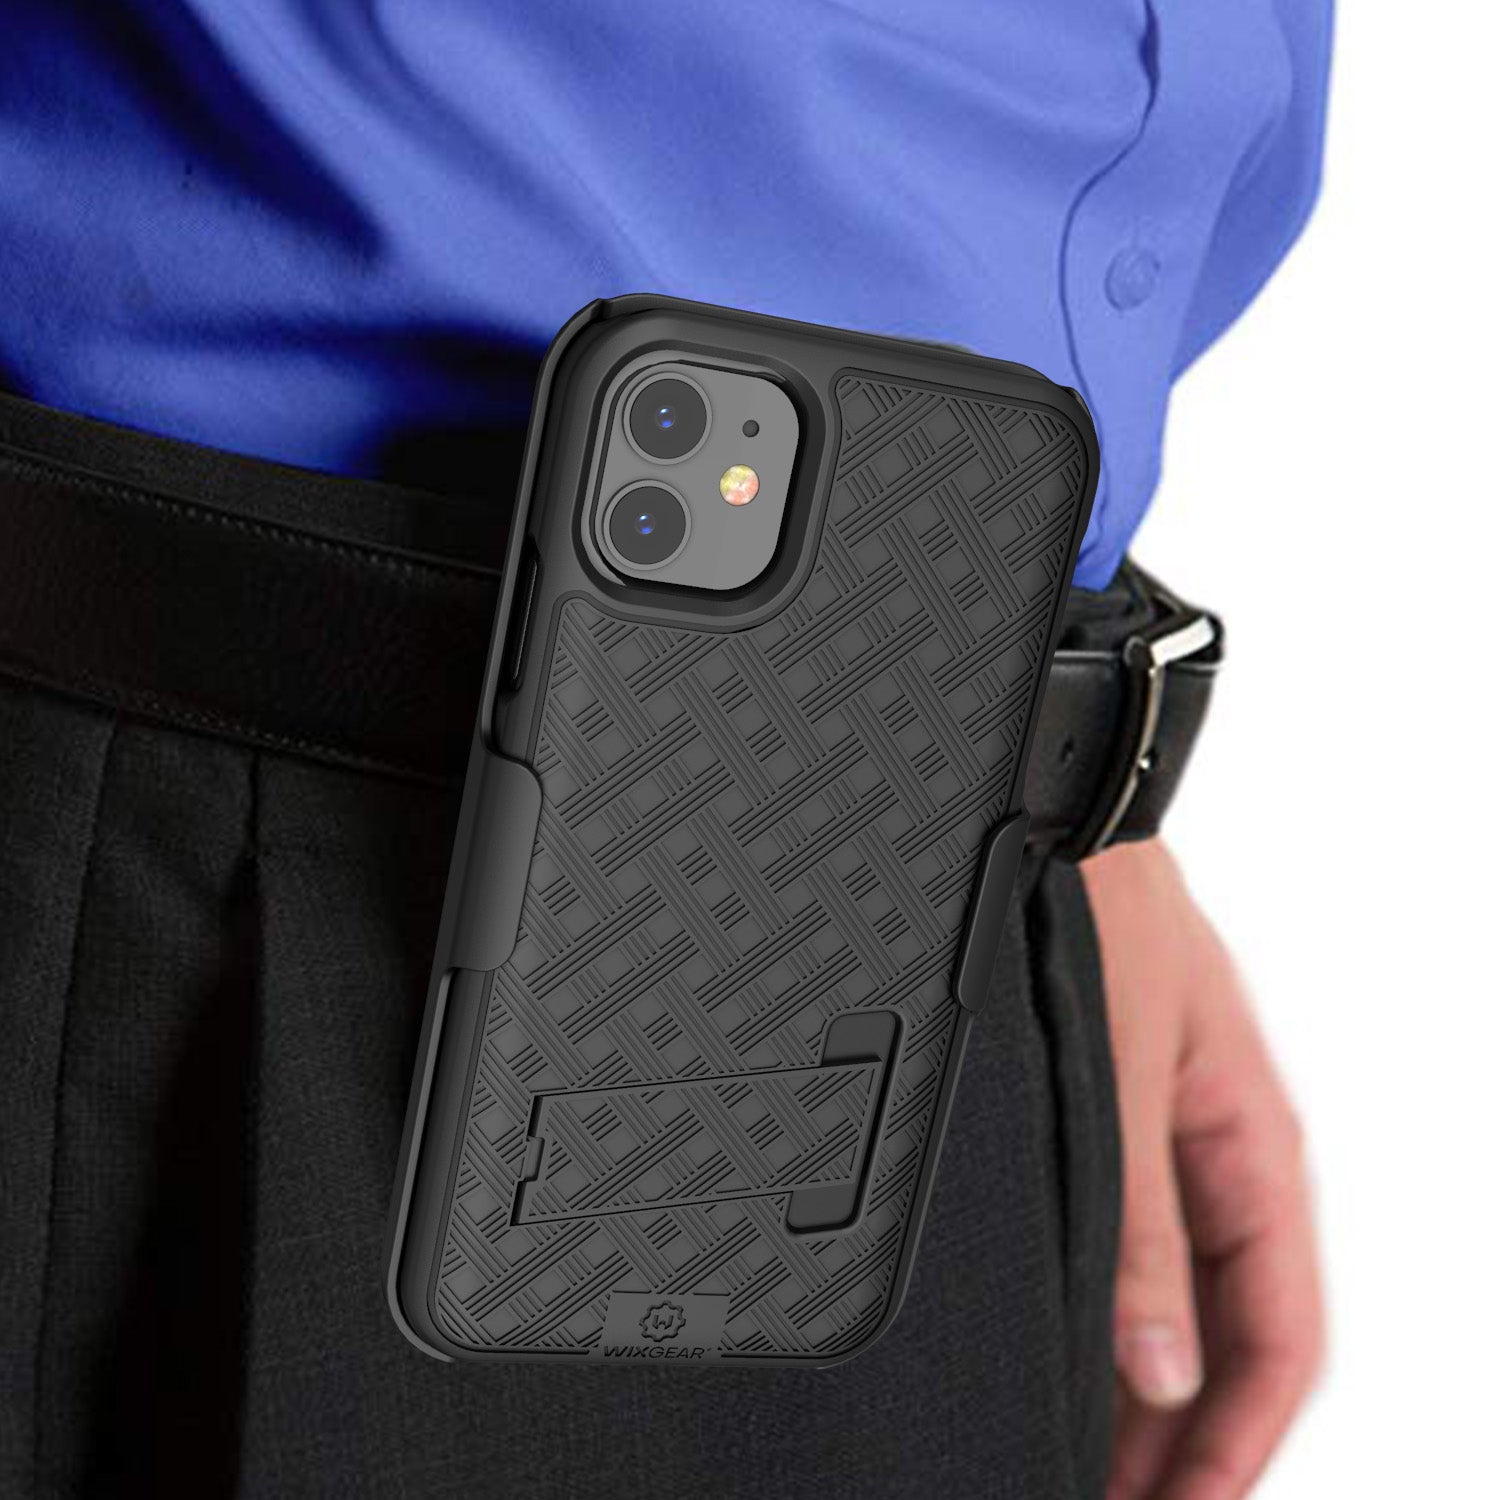 WixGear iPhone 11 Holster, Shell Holster Combo Case for Apple iPhone 11 with Stand and Belt Clip - Black